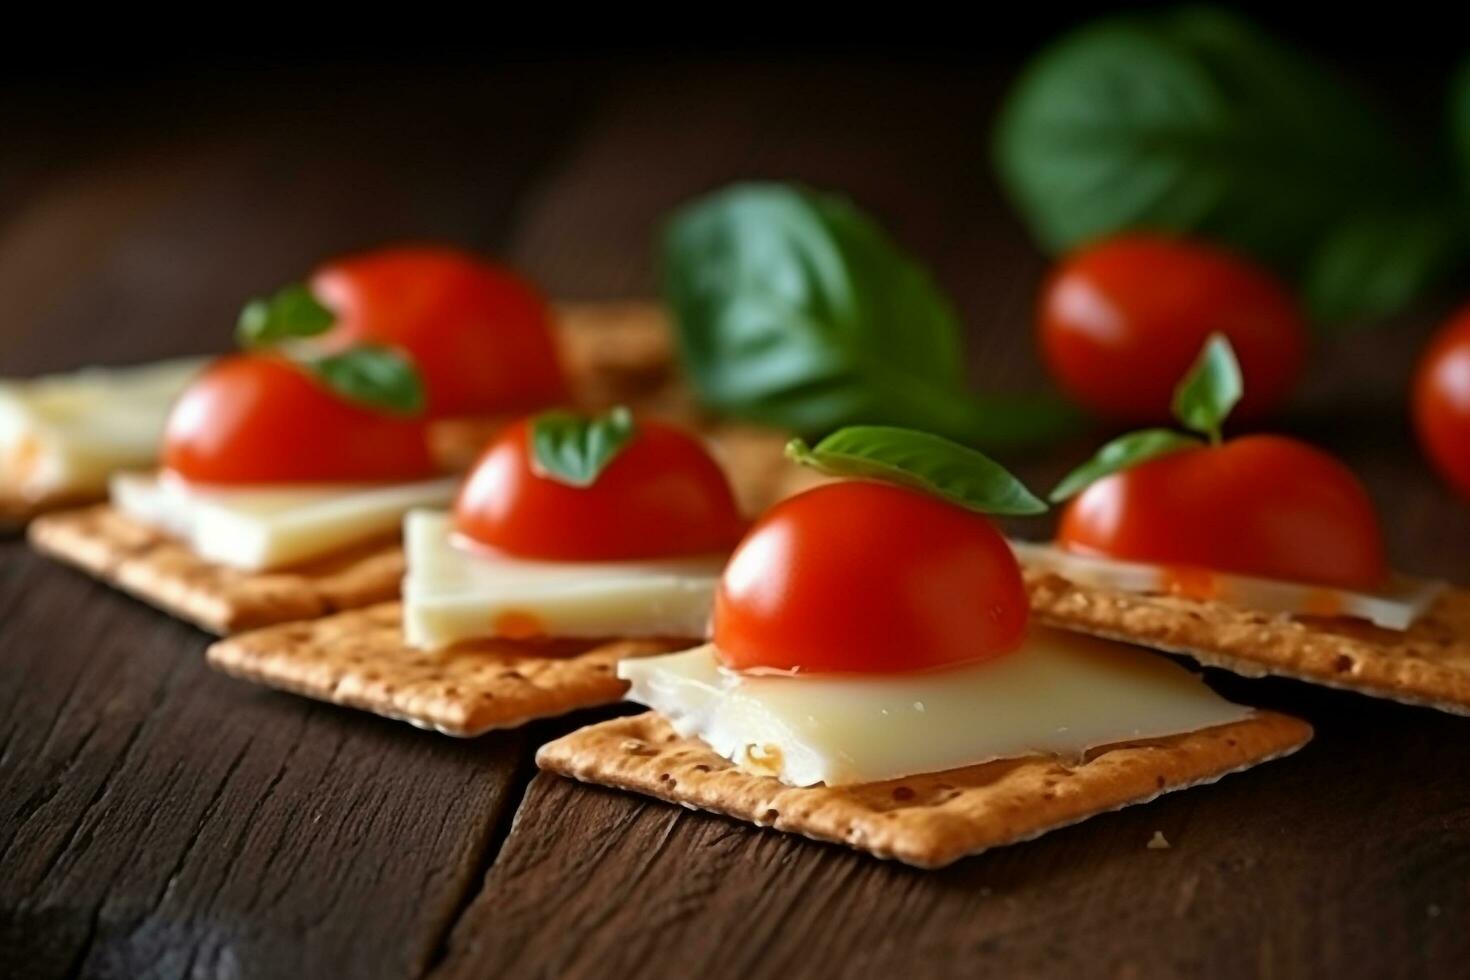 Crackers with cheese ,tomato in the wooden background photo